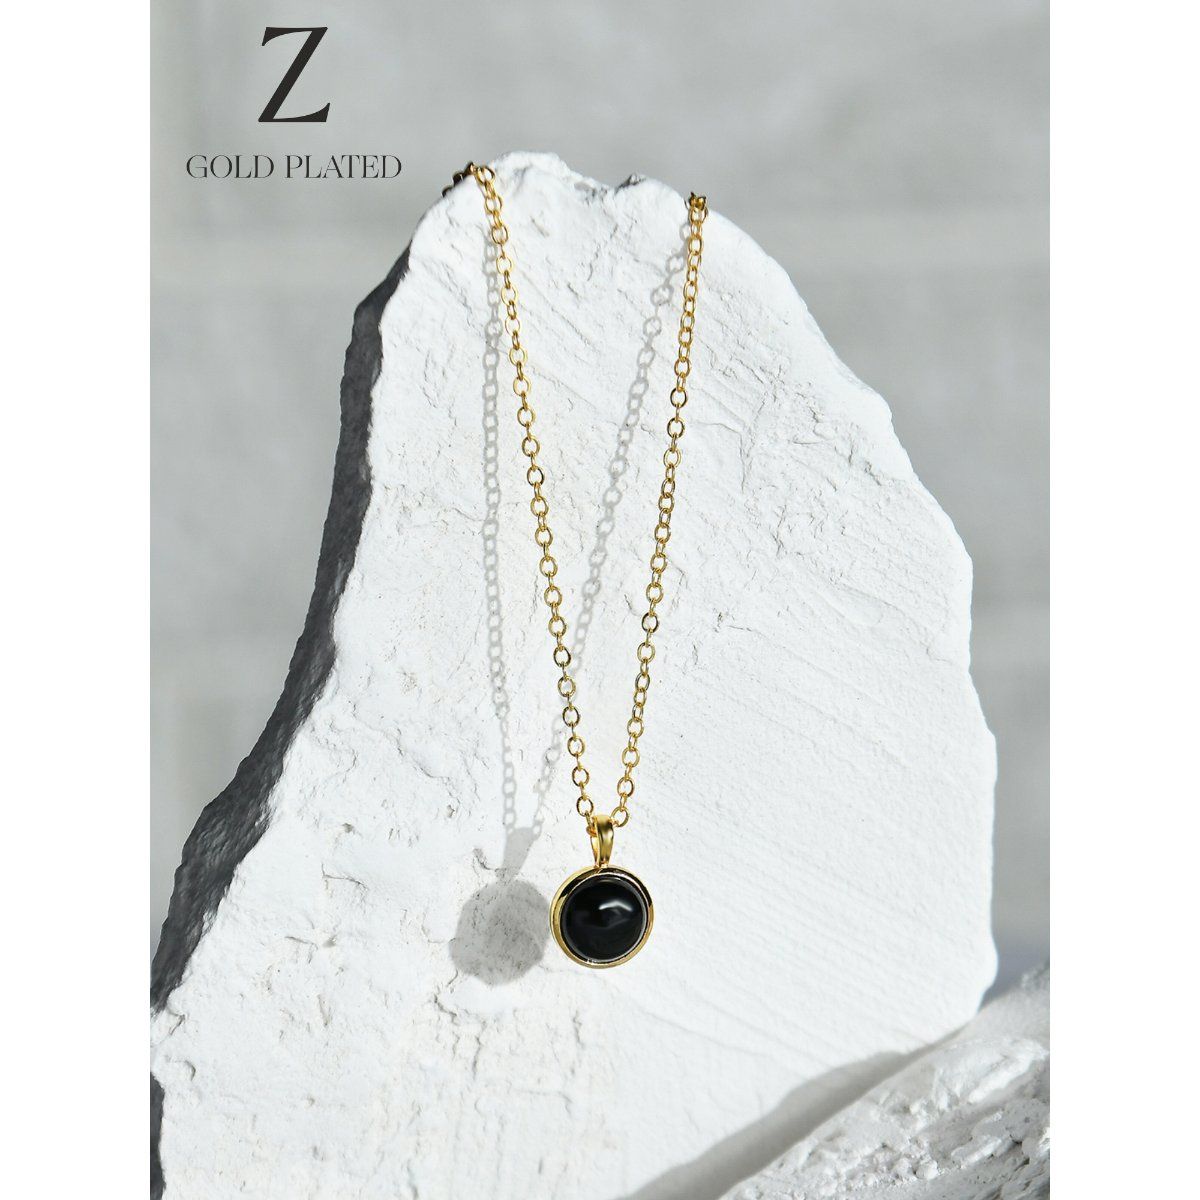 Buy Dream of the Past Green Onyx Pendant Necklace Online in India | Zariin